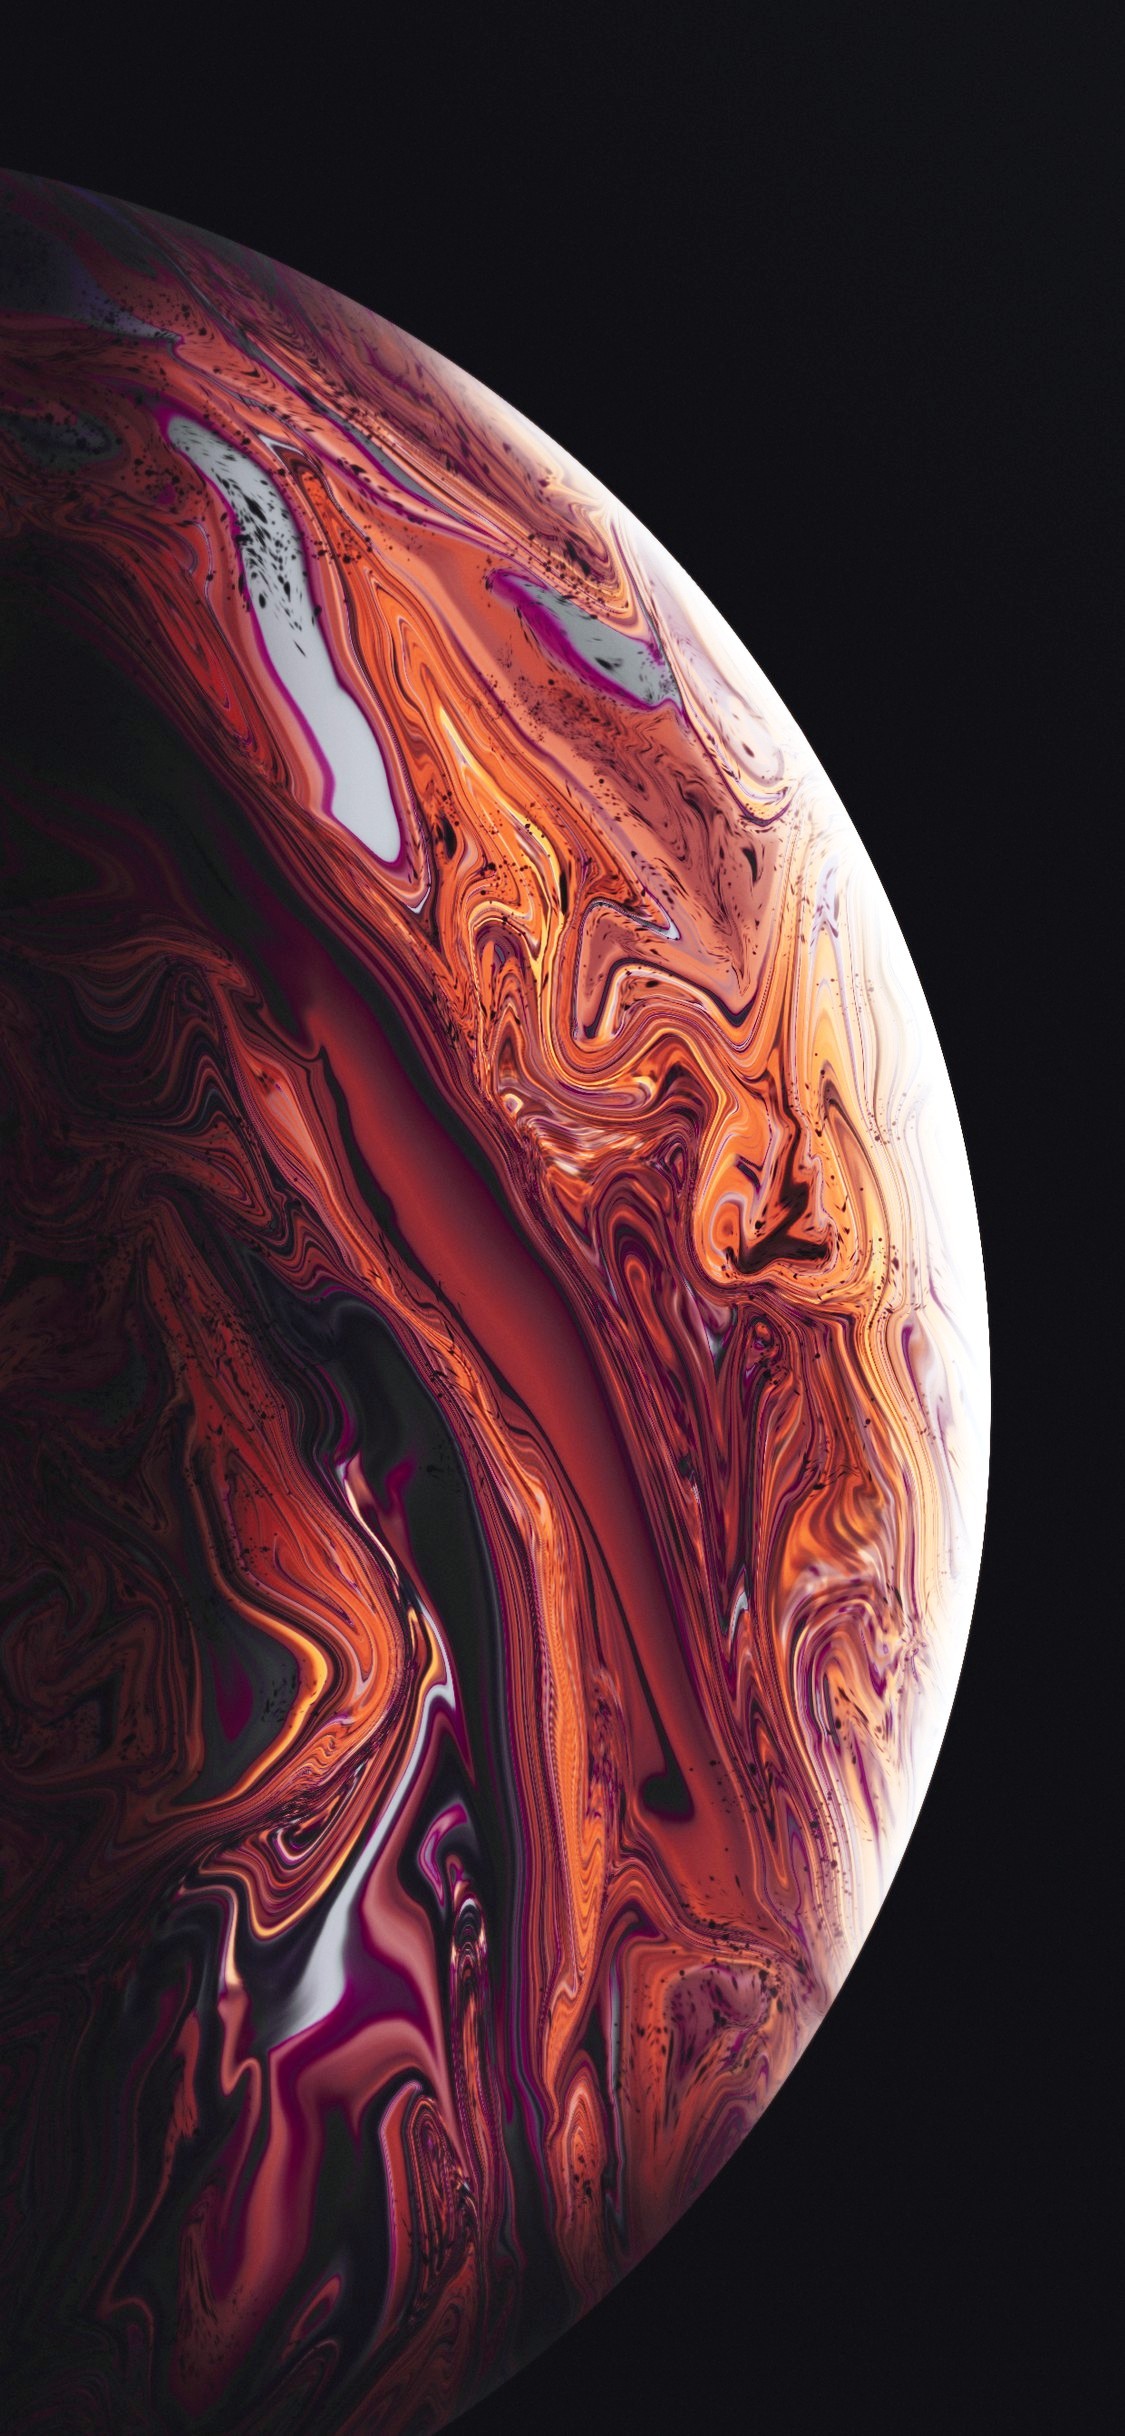 iPhone XS Home Screen Wallpaper with high-resolution 1125x2436 pixel. You can use this wallpaper for your iPhone 5, 6, 7, 8, X, XS, XR backgrounds, Mobile Screensaver, or iPad Lock Screen